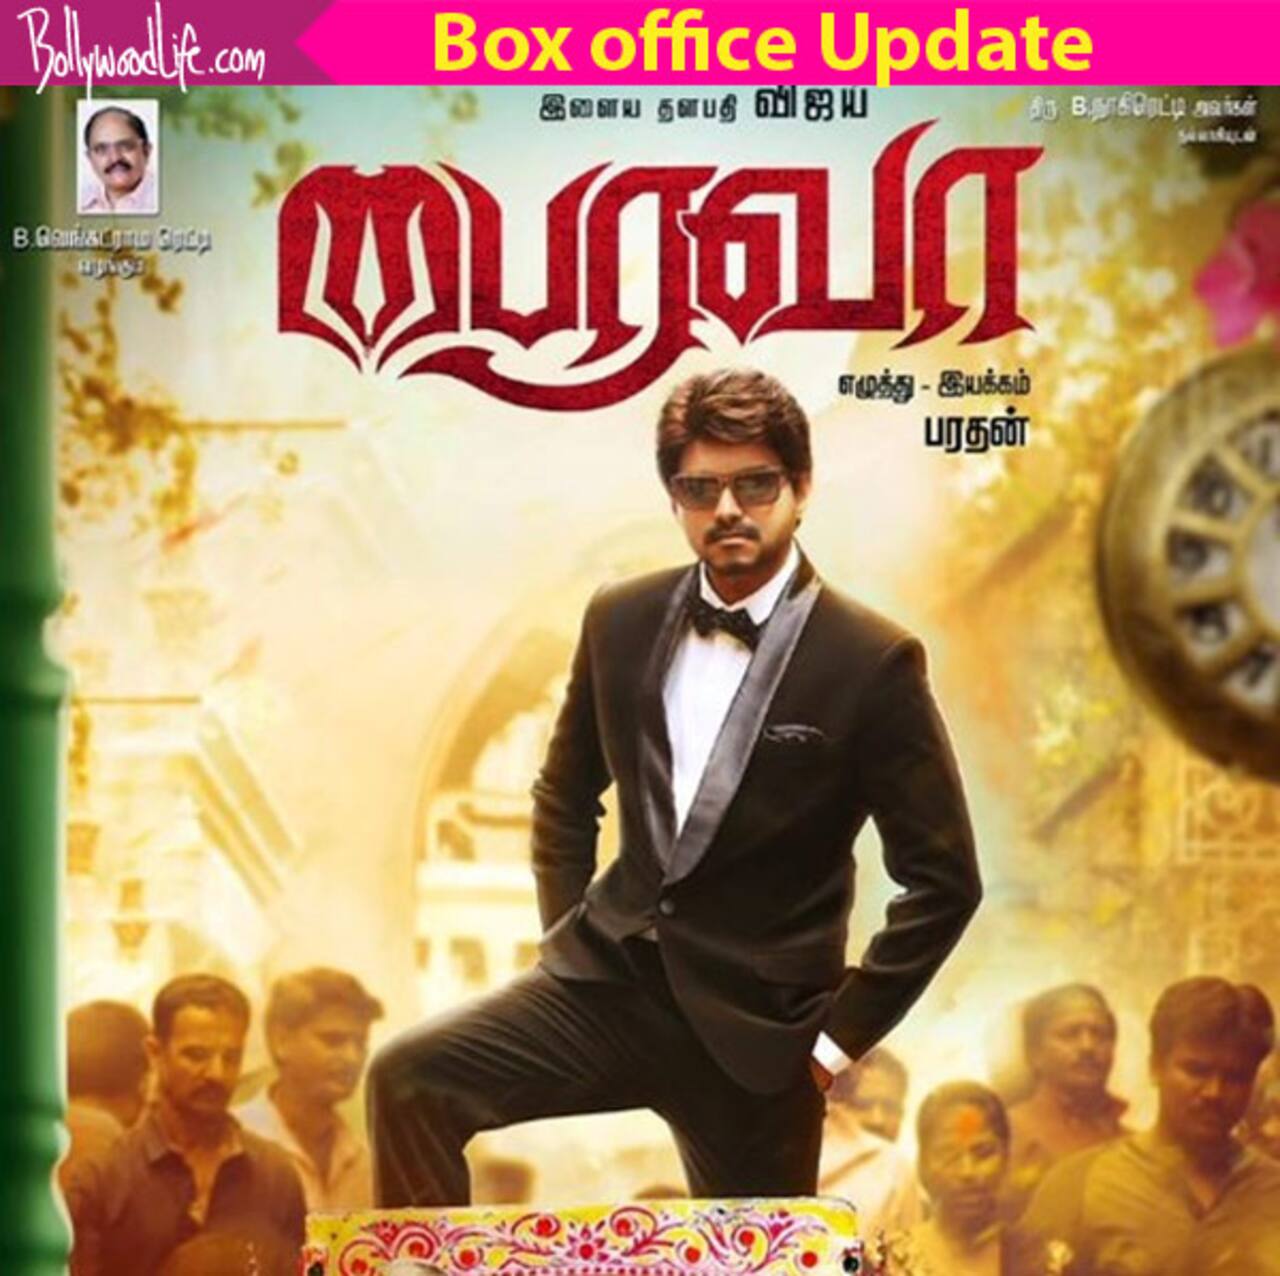 Bairavaa box office collection day 4: Vijay's massy film rakes in a whopping Rs 61.64 crore at the Tamil Nadu BO 